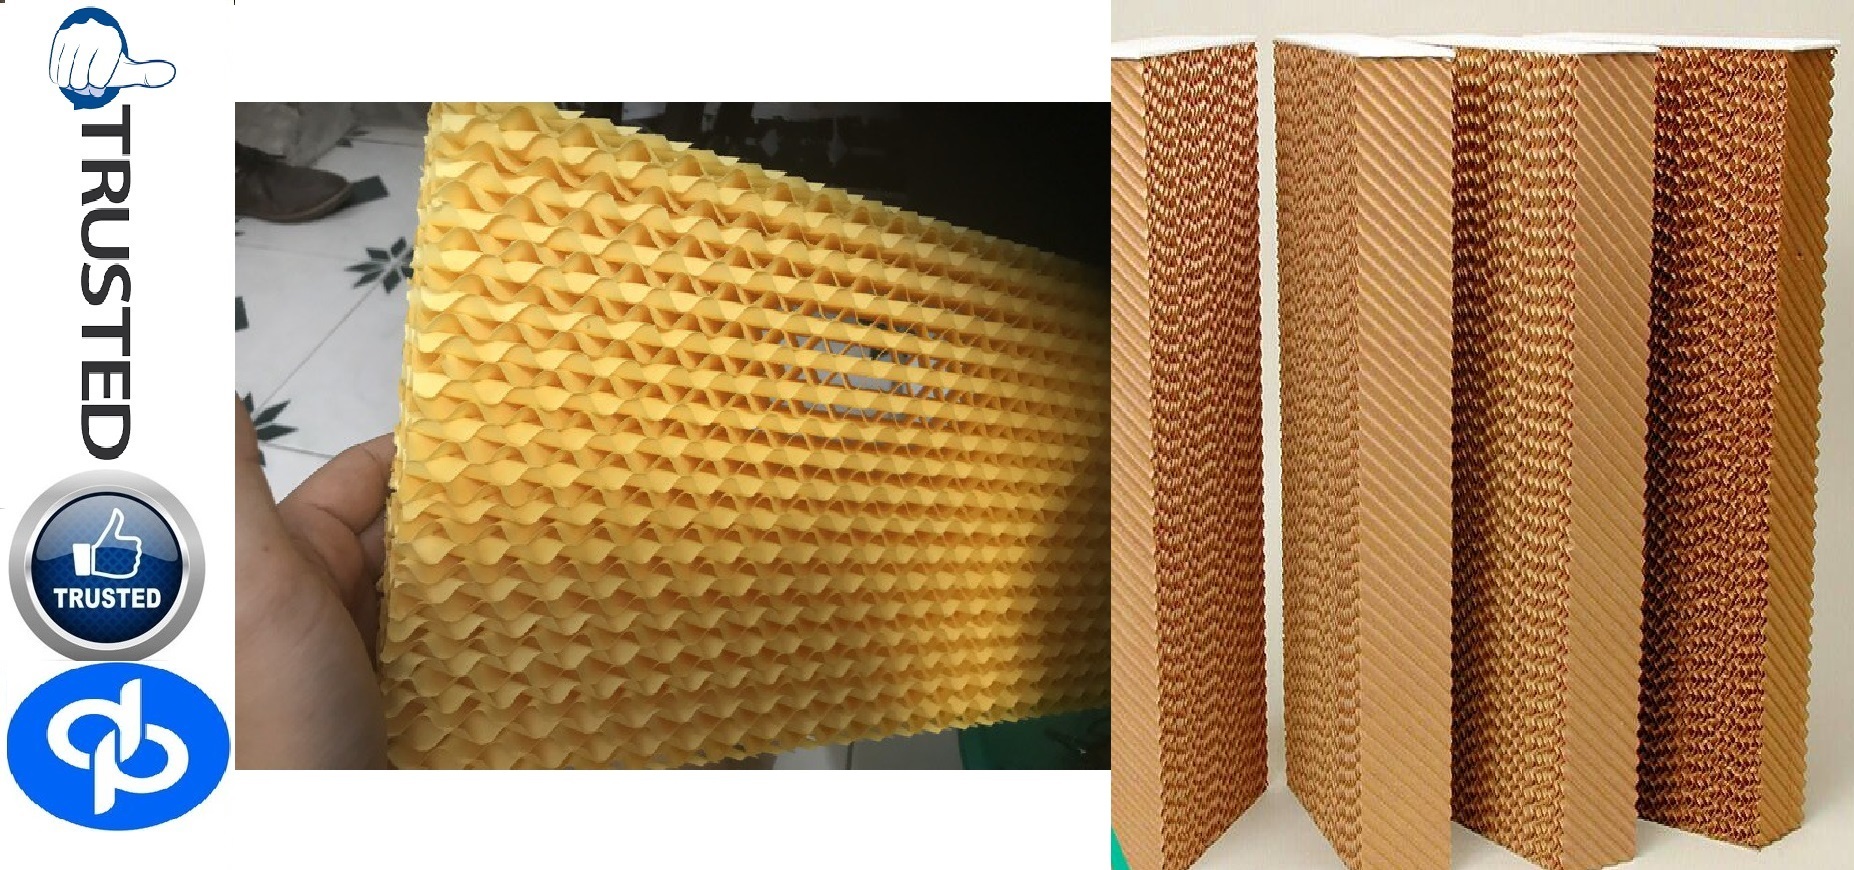 Honeycomb Evaporative Cooling pad Manufacturer from Mohali